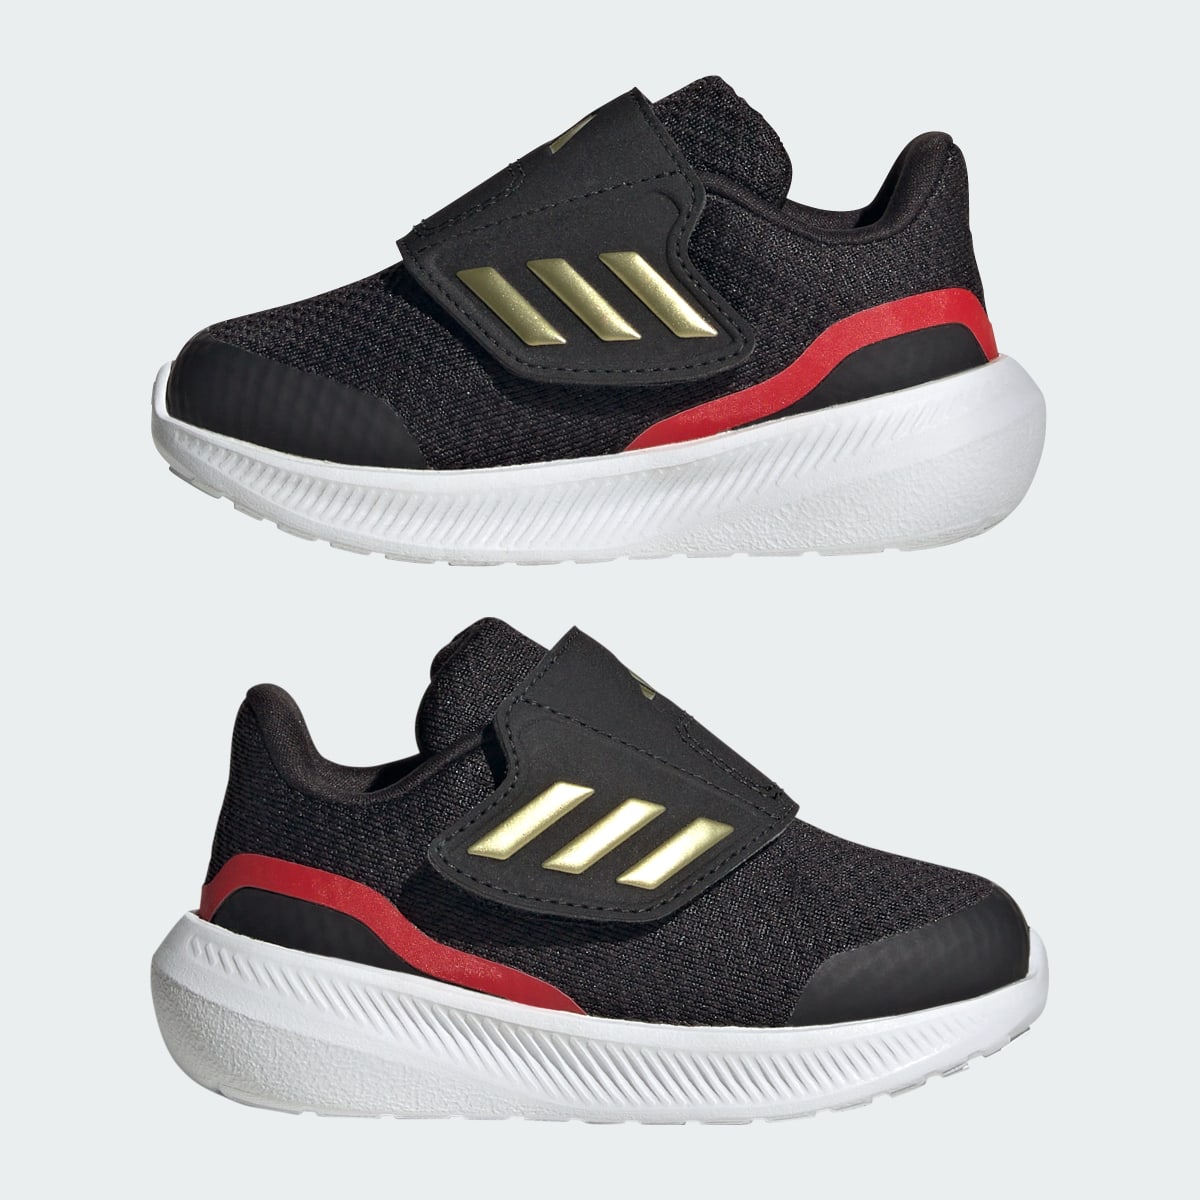 Adidas Runfalcon 3.0 Sport Running Hook-and-Loop Shoes. 8